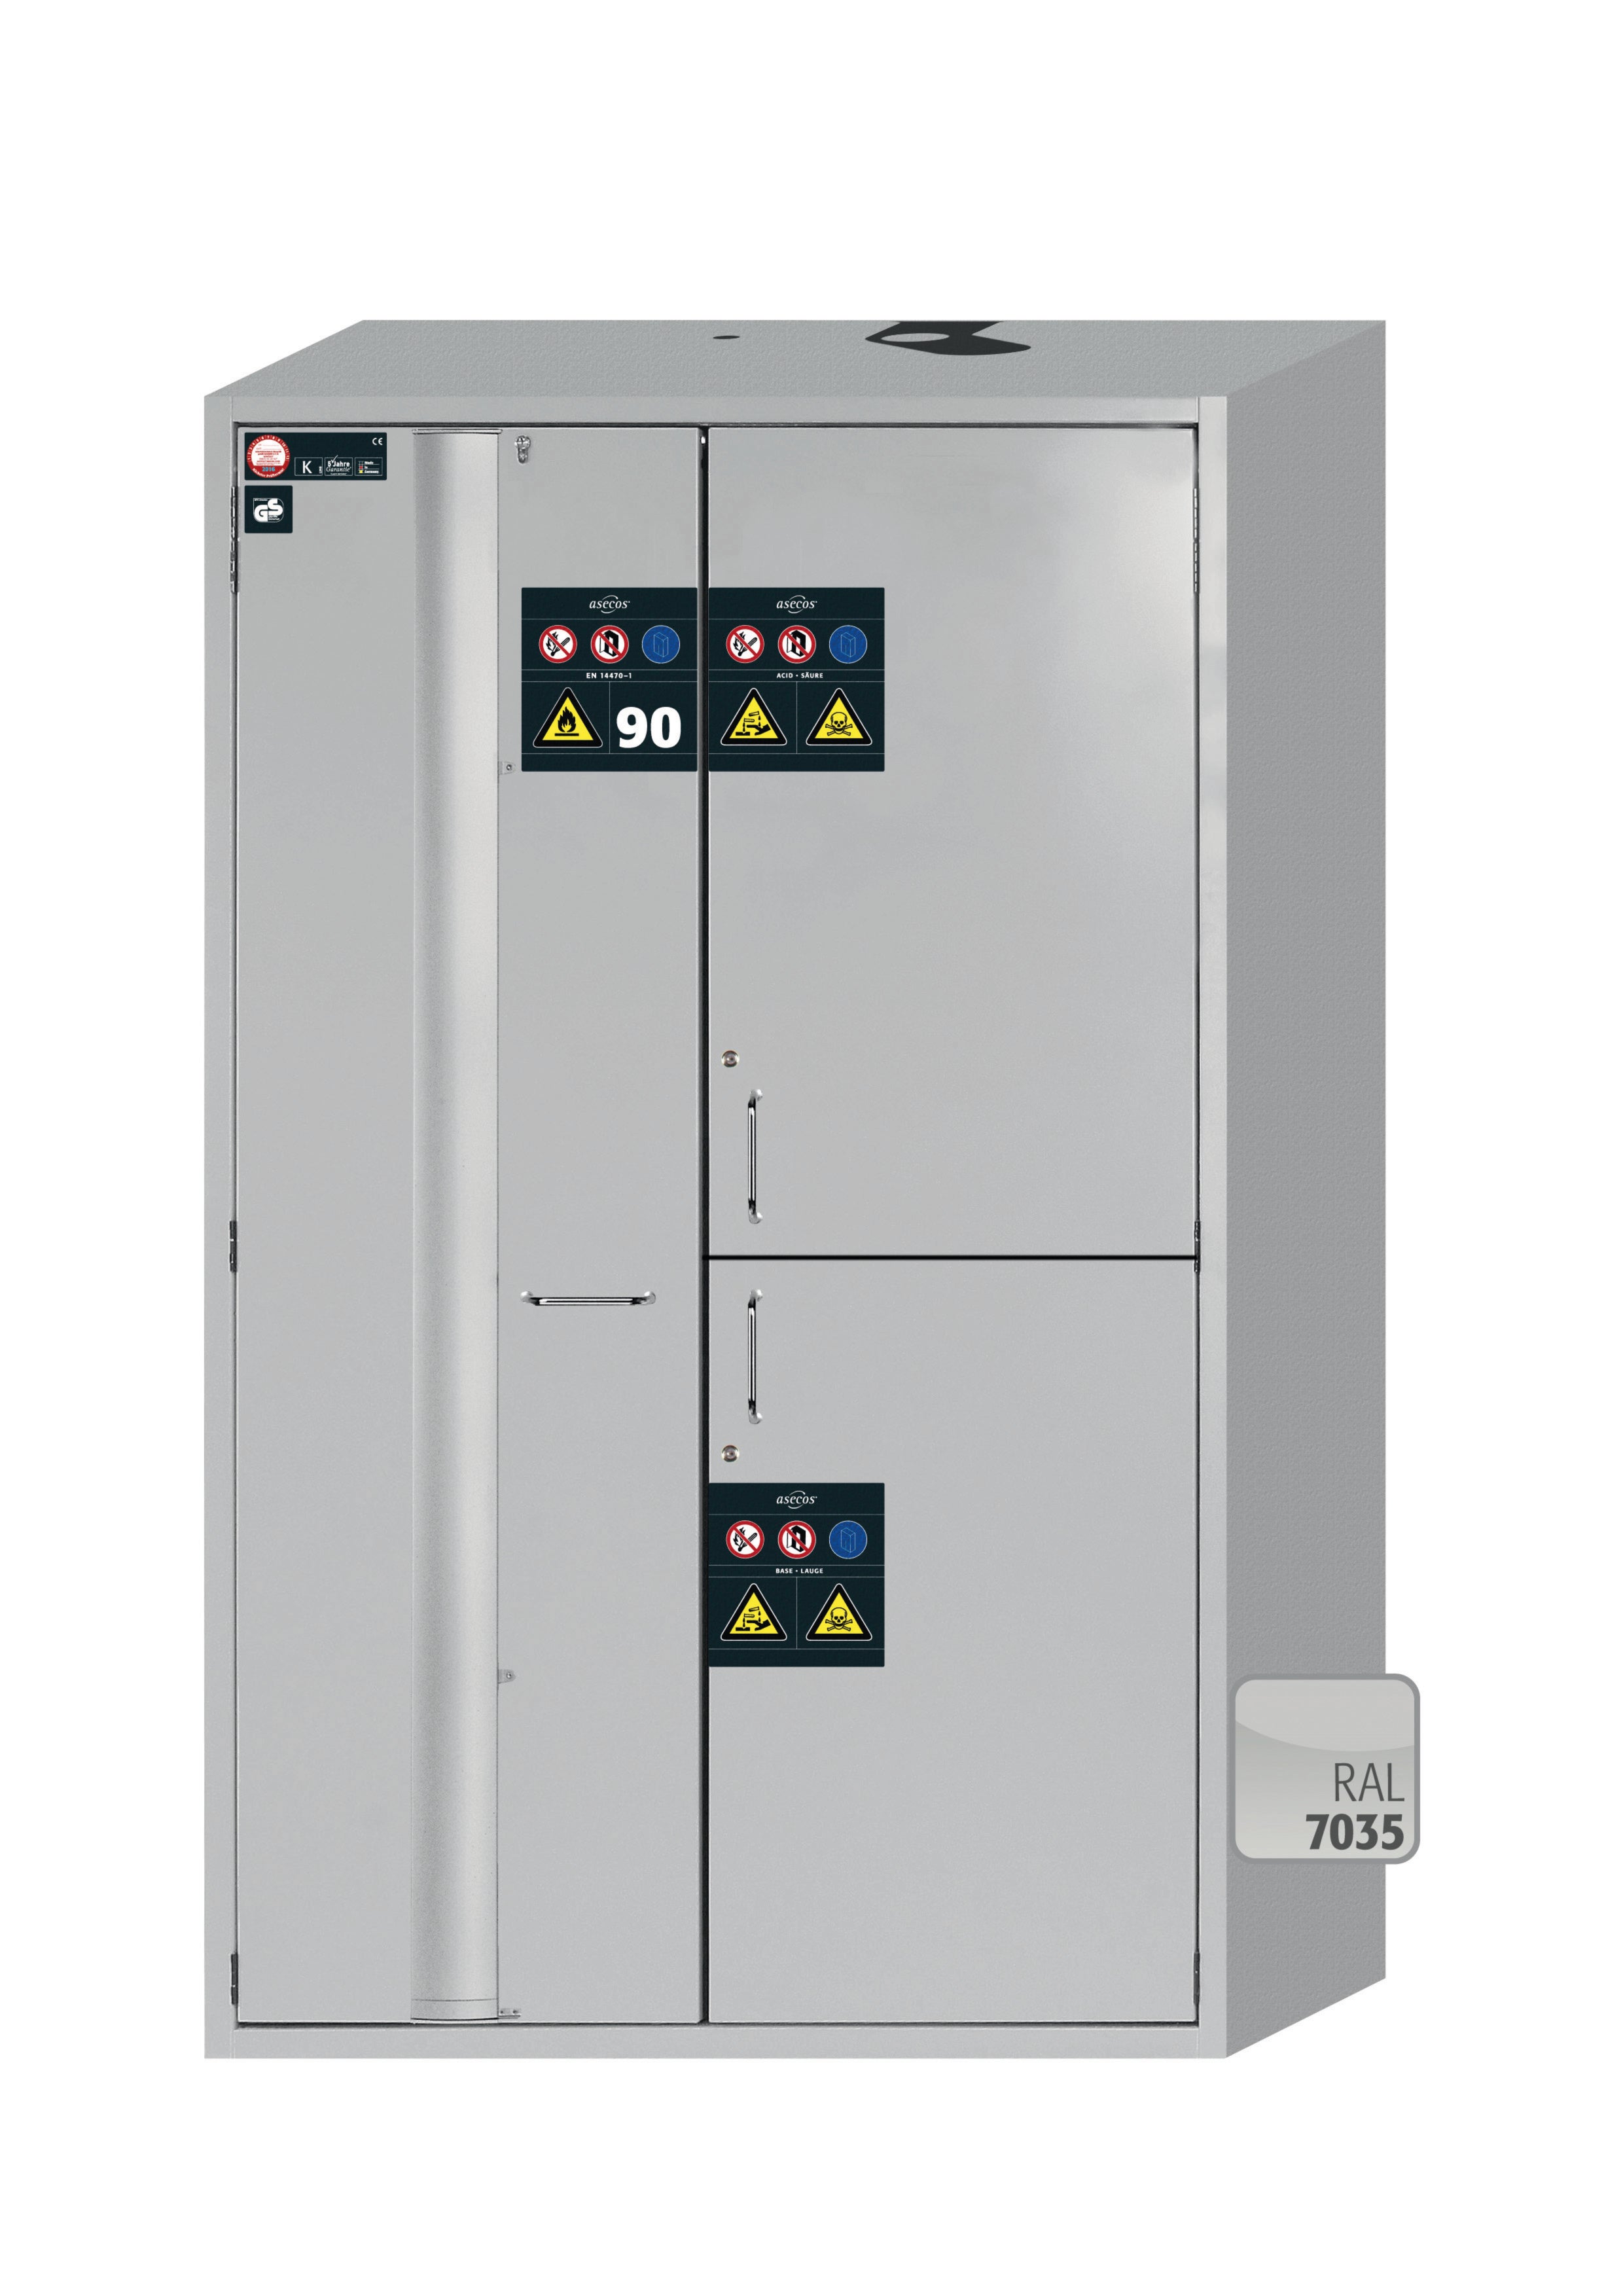 Type 90 combination safety cabinet K-PHOENIX Vol.2-90 model K90.196.120.MF.FWAC in light gray RAL 7035 with 3x standard shelves (stainless steel 1.4301)